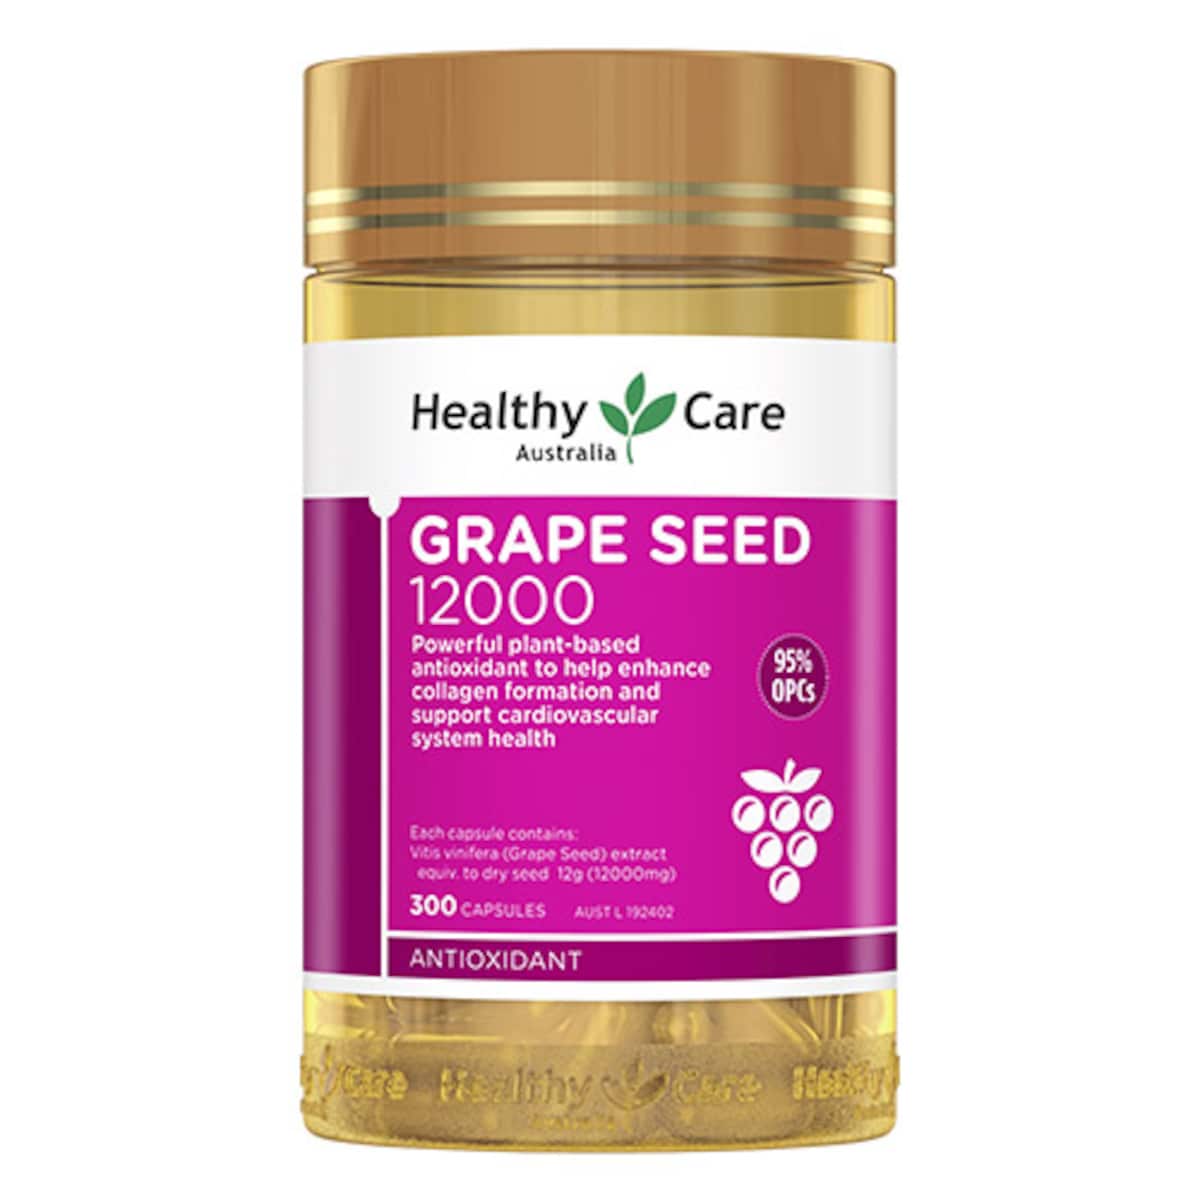 Healthy Care Grape Seed Extract 12000 300 Capsules